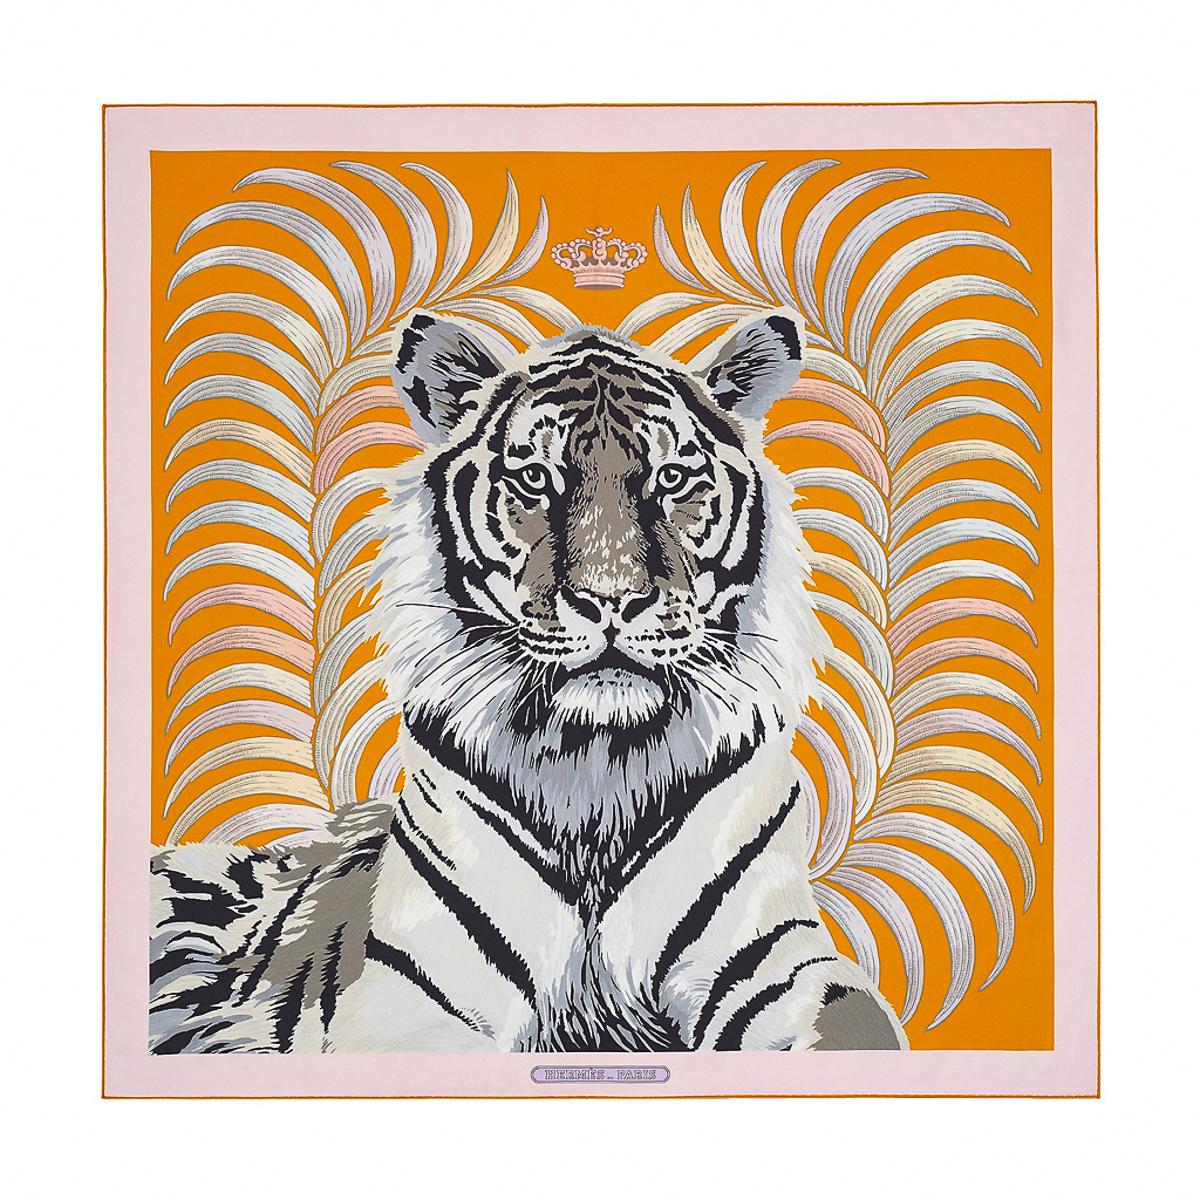 Mightychic offers an  Hermes Tigre Royal Double Face silk scarf. 
Hermes has created the first scarf to be printed on both sides.
This unique technique allows you to have two scarves in one!
A tribute to the solitary majestic Bengal tiger.
Orange,